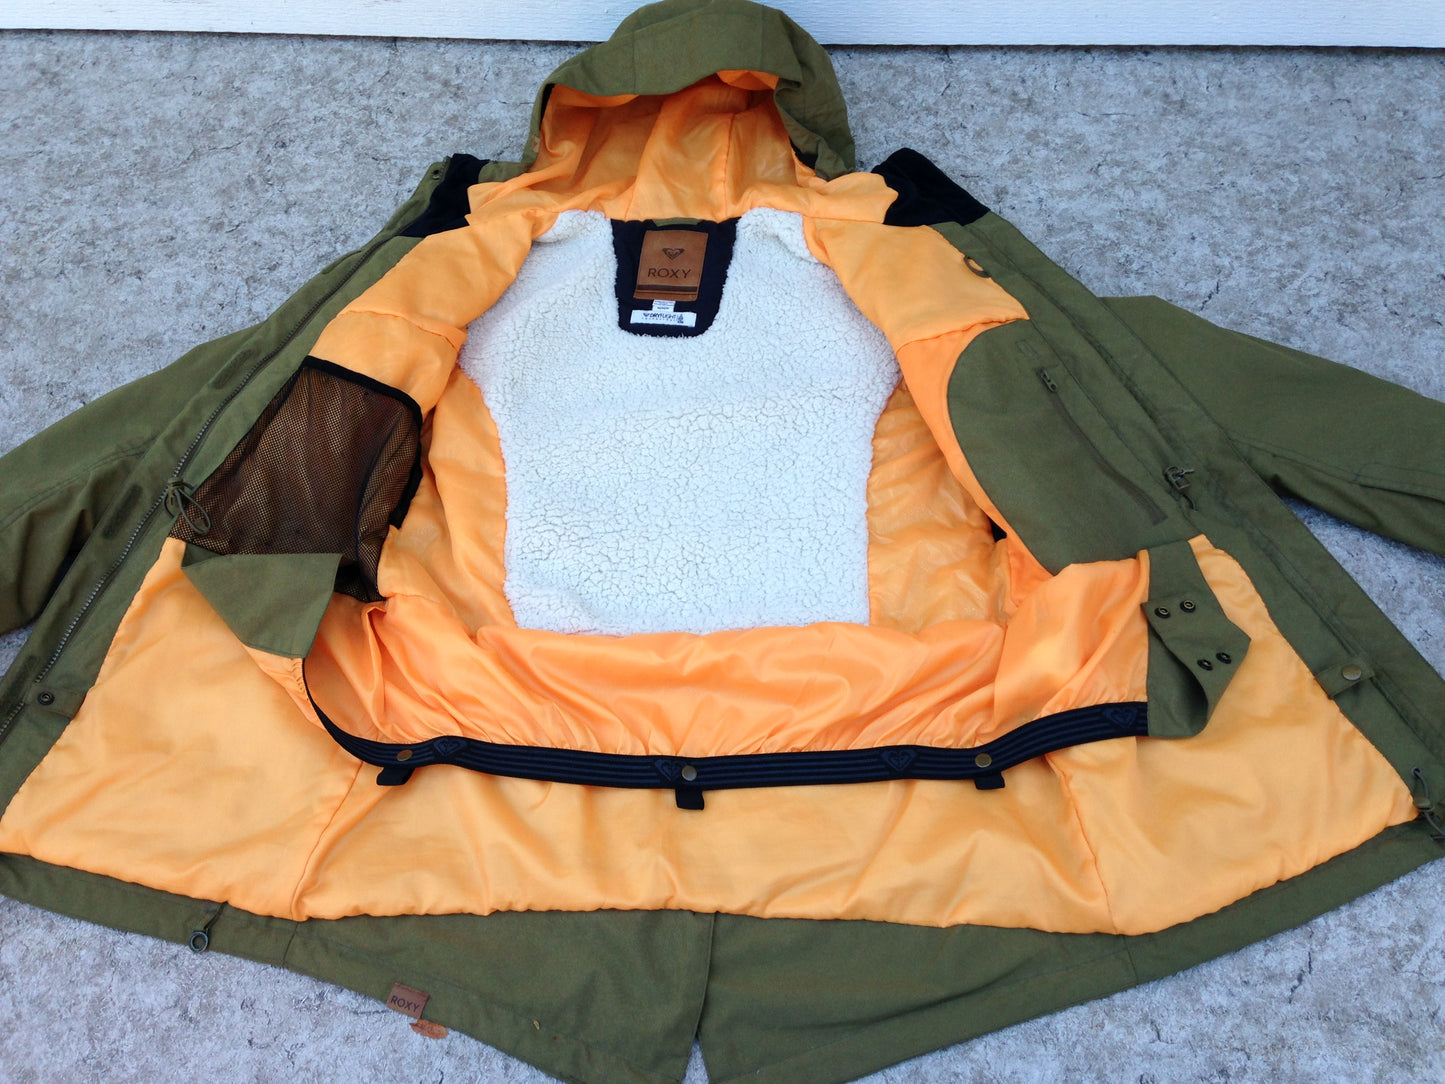 Winter Coat Ladies Size Medium ROXY Dry Flight Sage Tangerine With Snow Belt Made For Cold and Snow New Demo Model